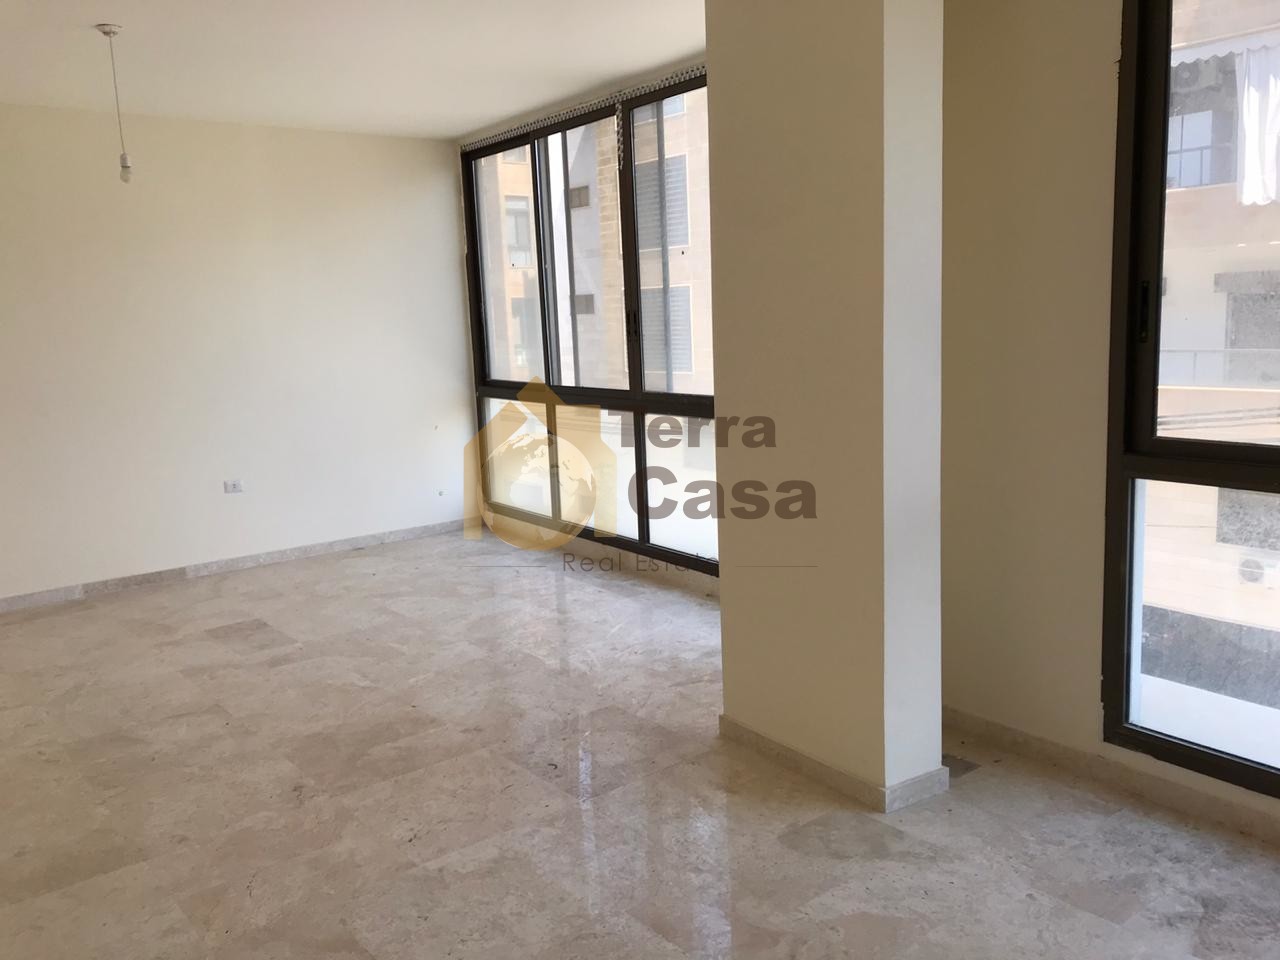 Brand new apartment cash payment. Ref# 2523